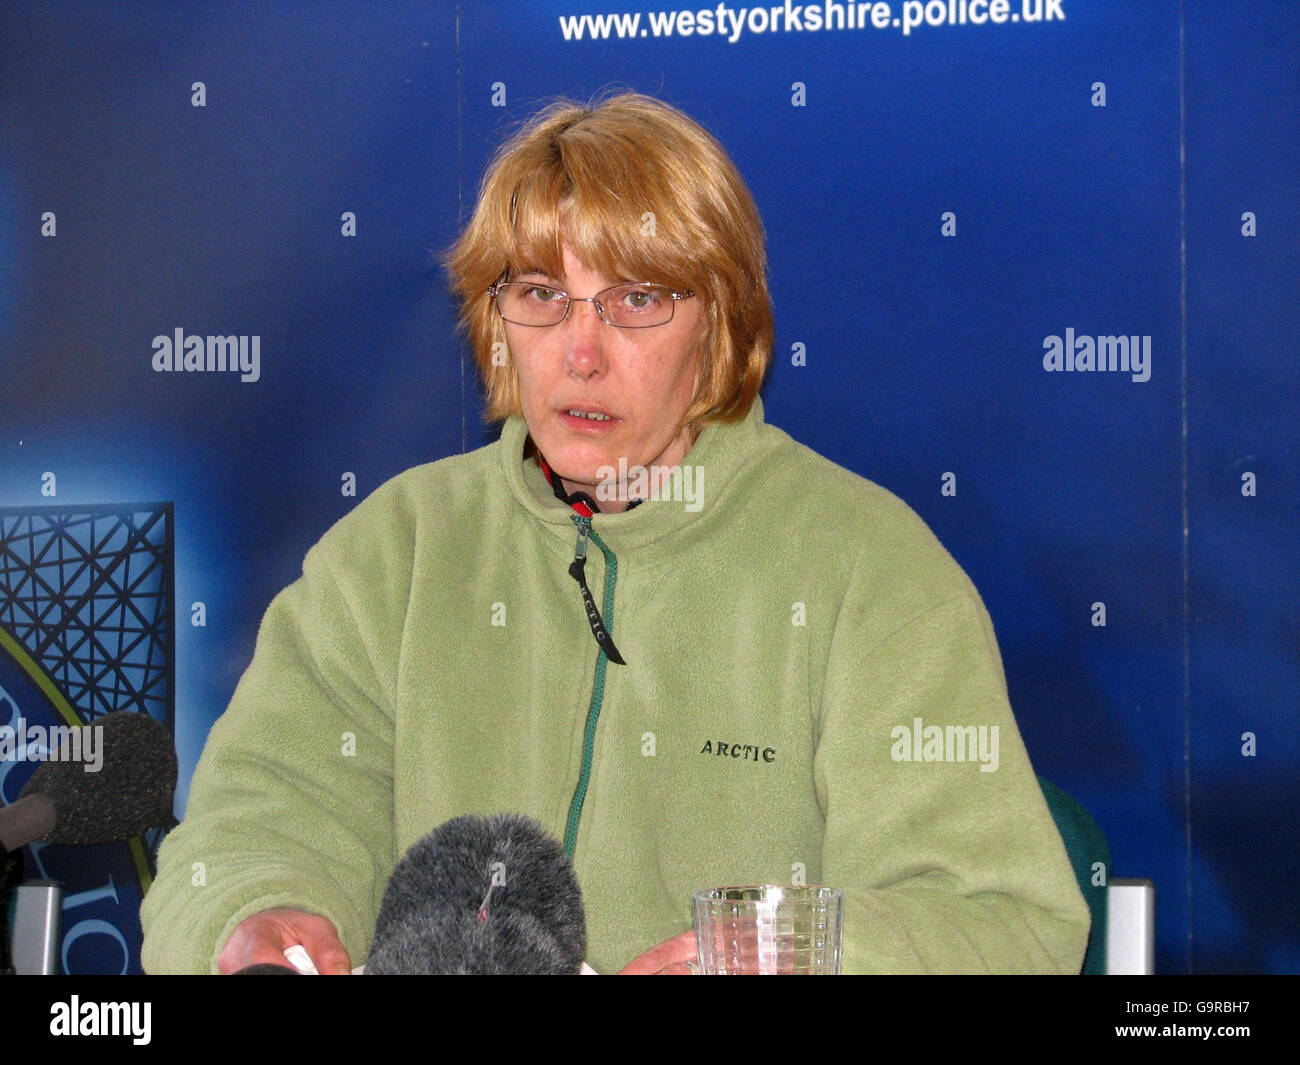 Beverley O'Toole makes an emotional appeal at Dewsbury police station for help to trace the killer of her only son, Adam O'Toole, an 18-year-old student who died in a hit-and-run collision in Huddersfield, West Yorkshire, on Tuesday. PRESS ASSOCATION Photo. Stock Photo